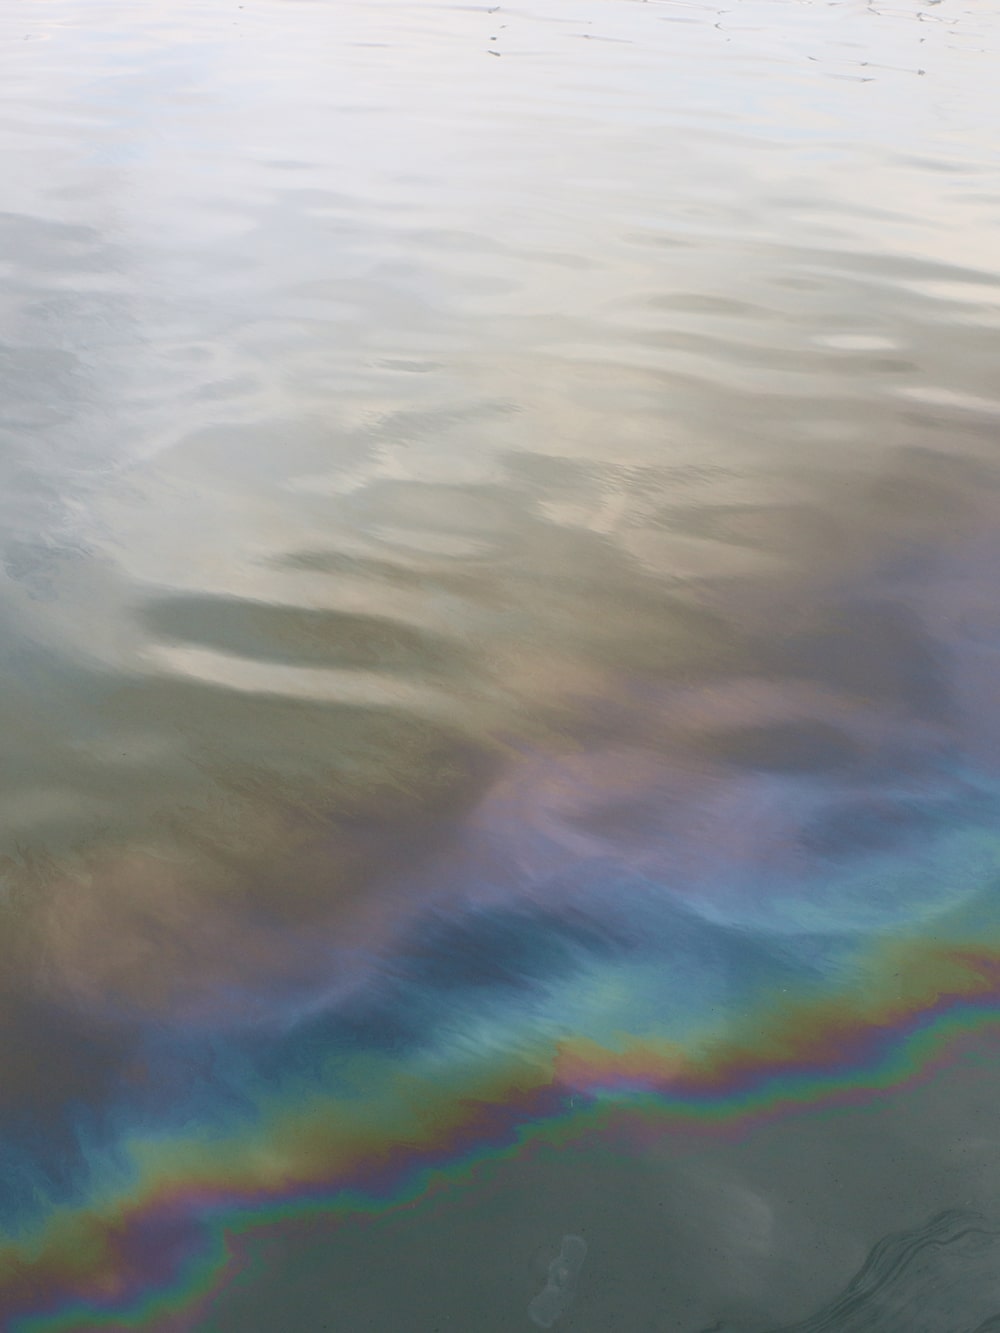 A photograph of the surface of calm water with a slight rainbow refraction